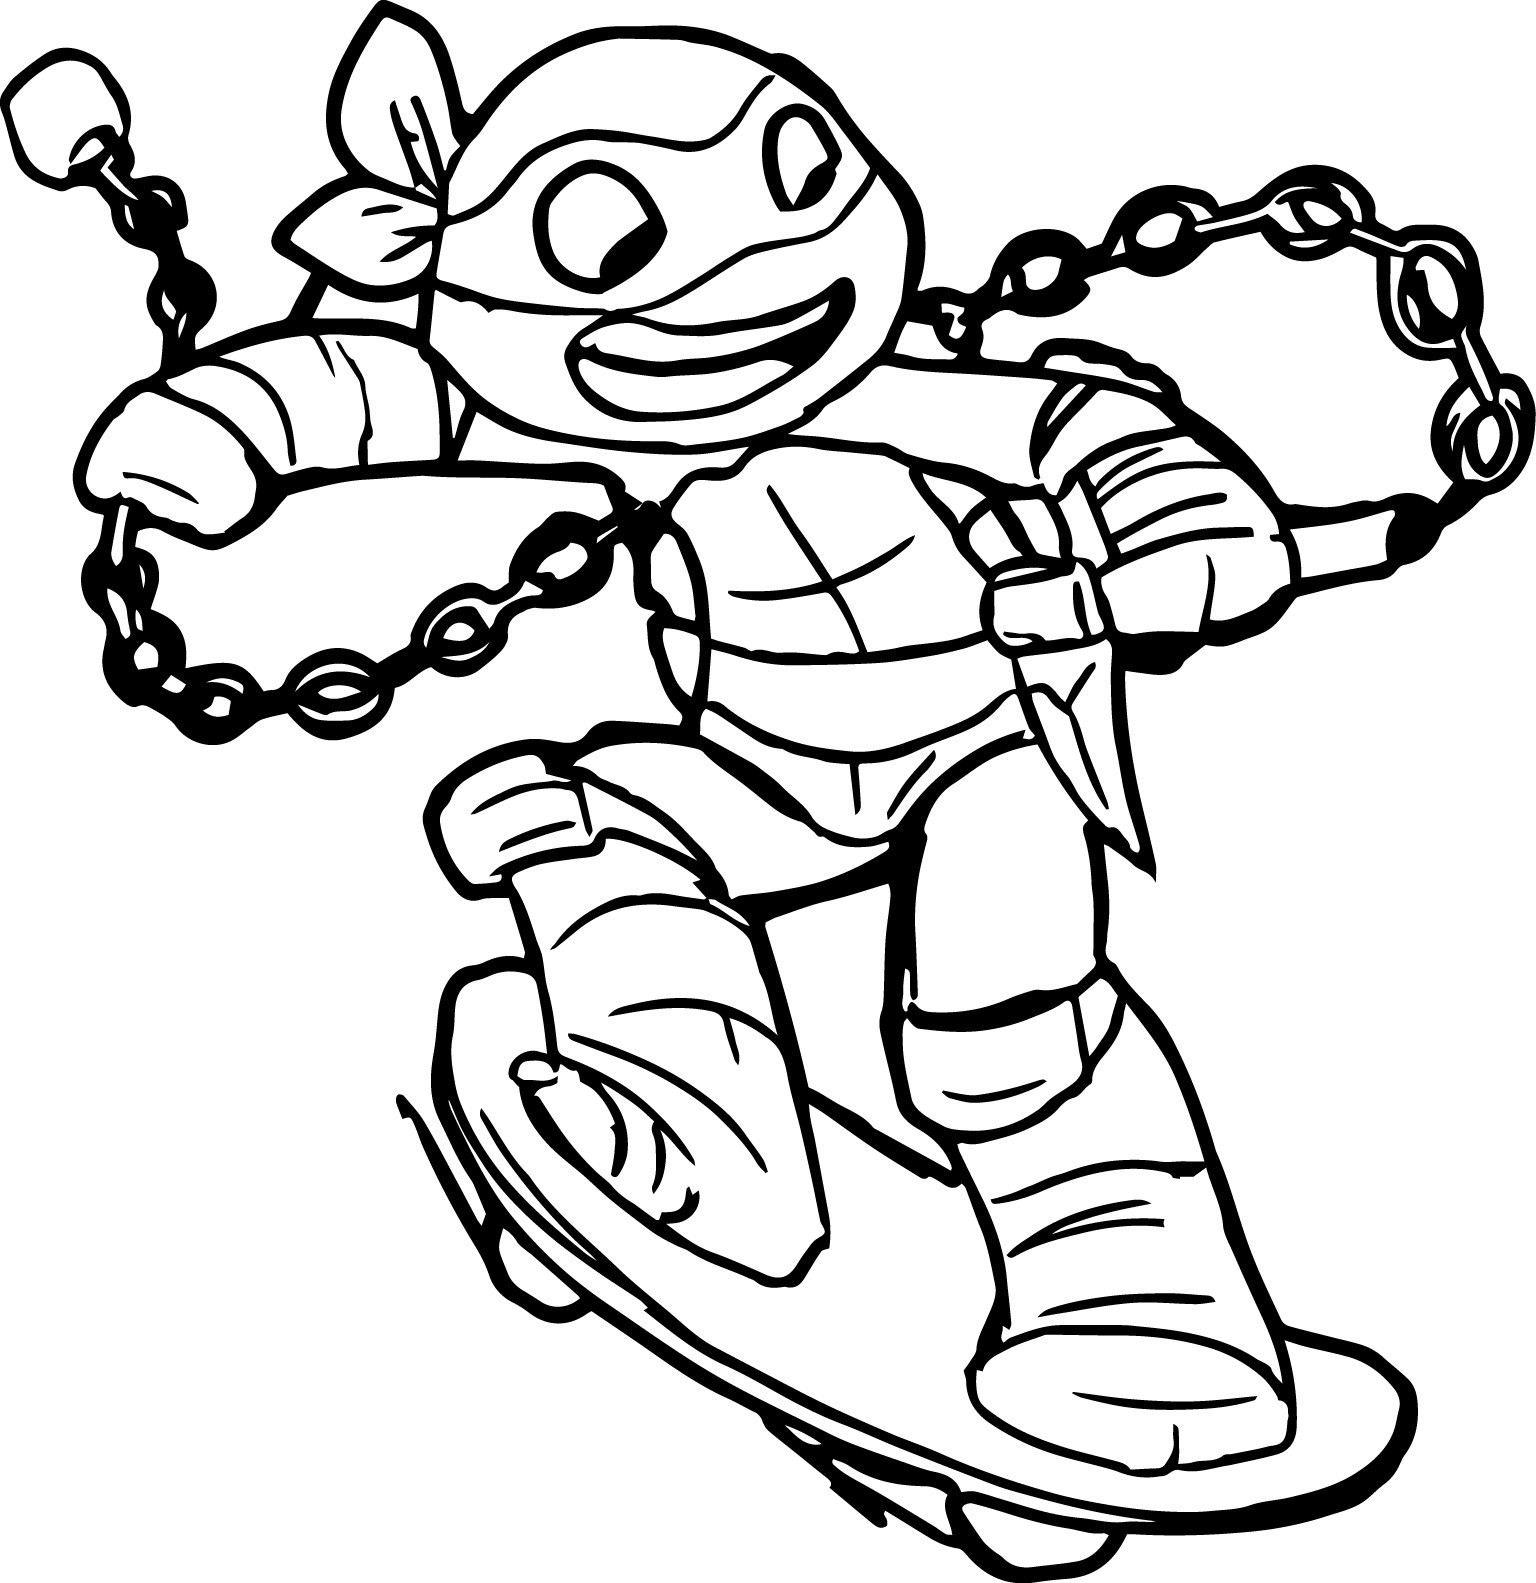 Welcome Coloring Pages Coloring Pages Welcome To Kindergarten Coloring Pages Coloring